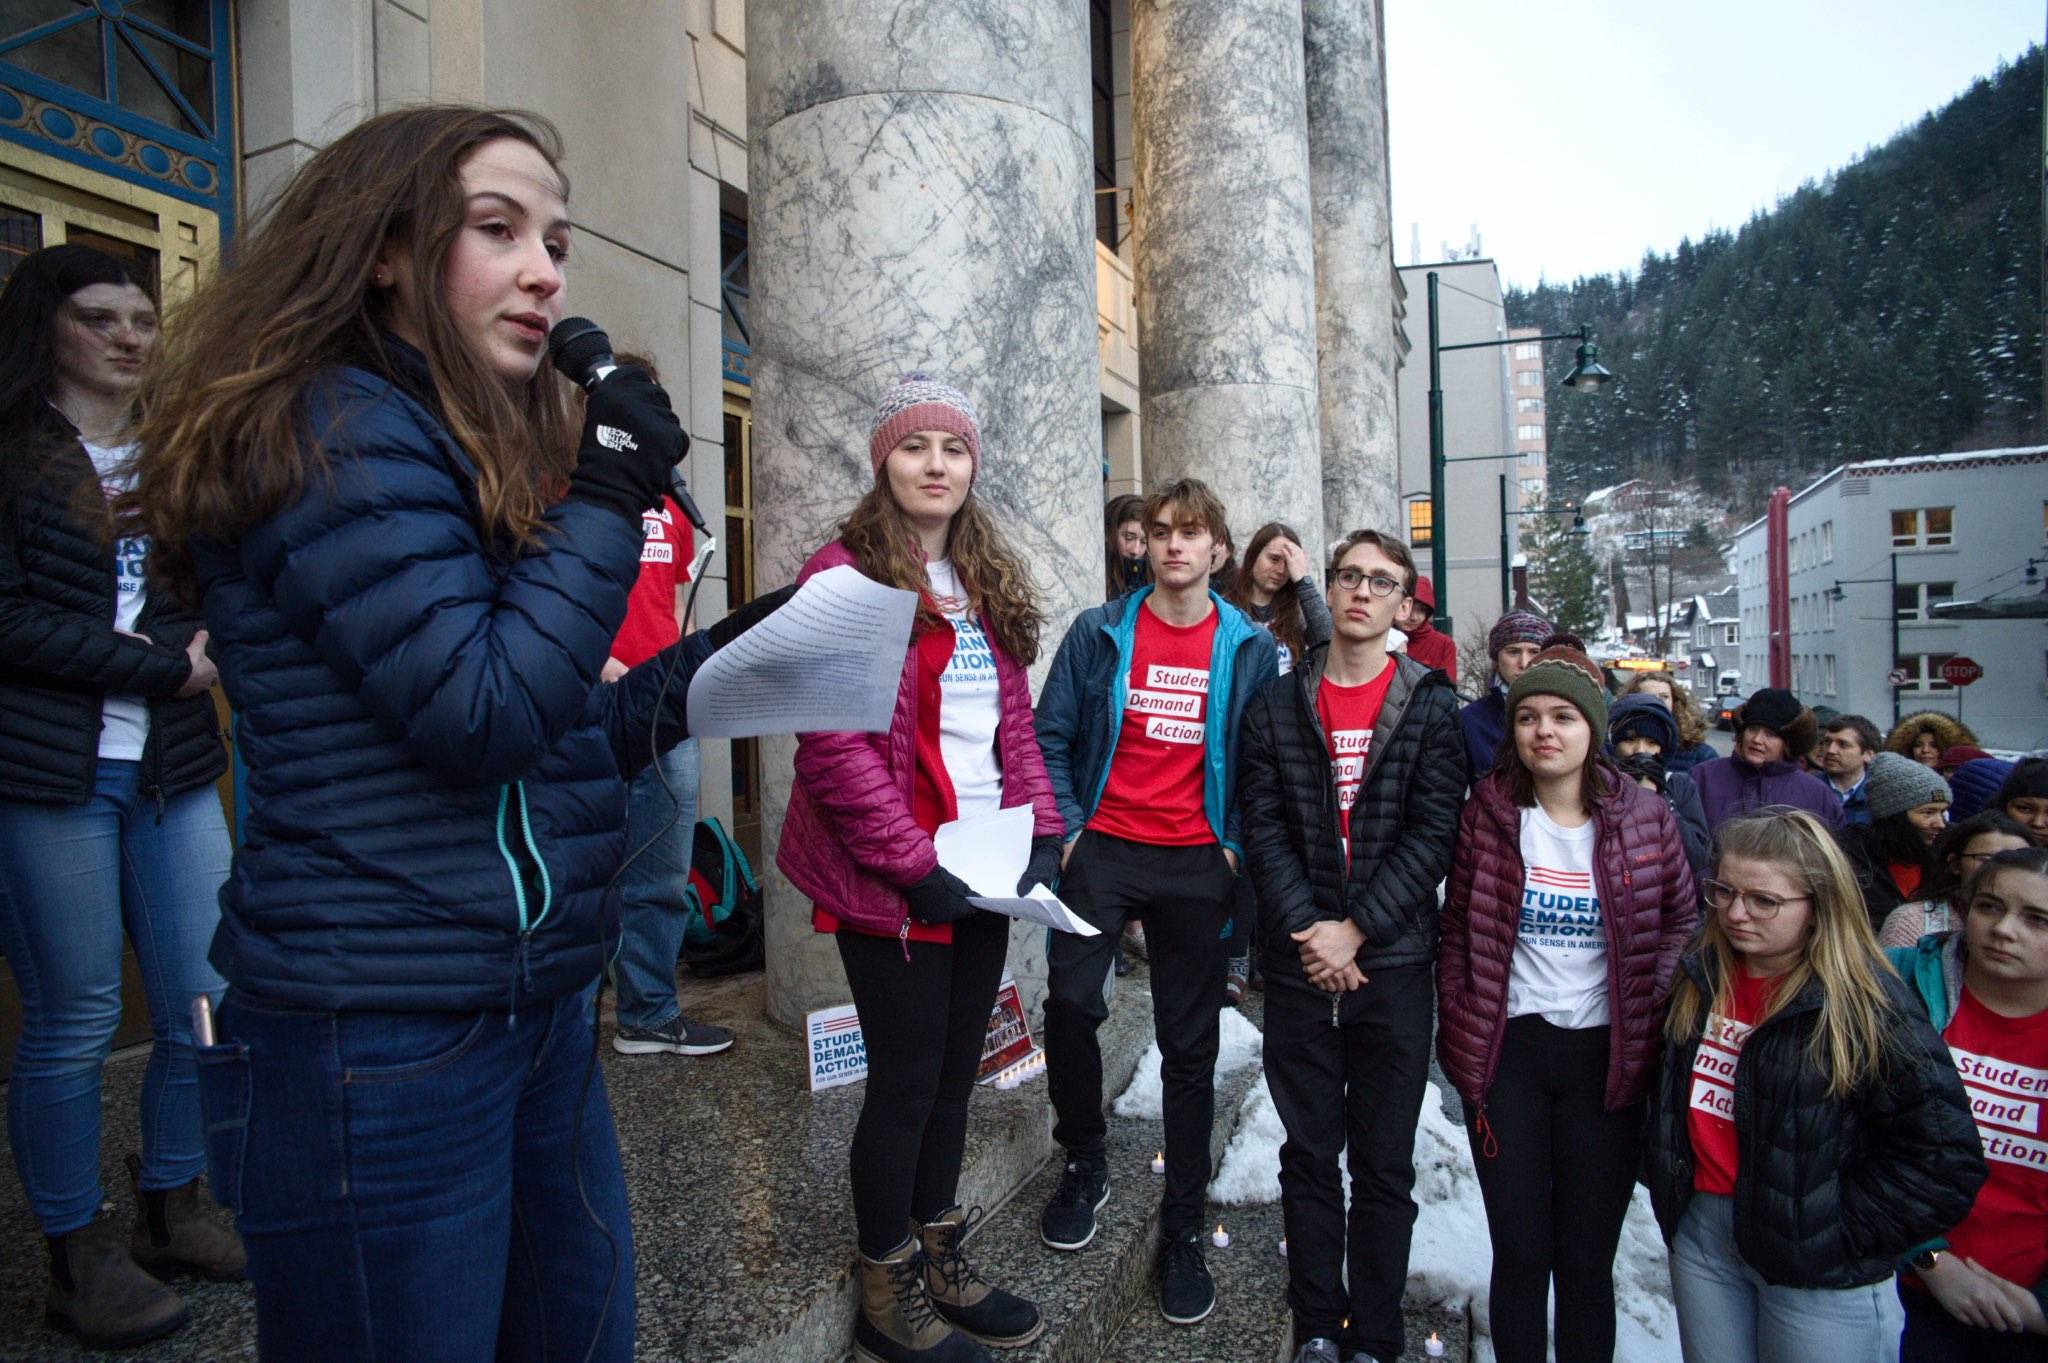 Katie McKenna, a junior at Juneau-Douglas High School, speaks against gun violence at a vigil for the victims of the shooting last year in Parkland, Florida, held at the Capitol on Thursday, Feb. 14, 2019 on the one-year anniversary of the shooting at Marjory Stoneman Douglas High School. (Michael Penn | Juneau Empire)